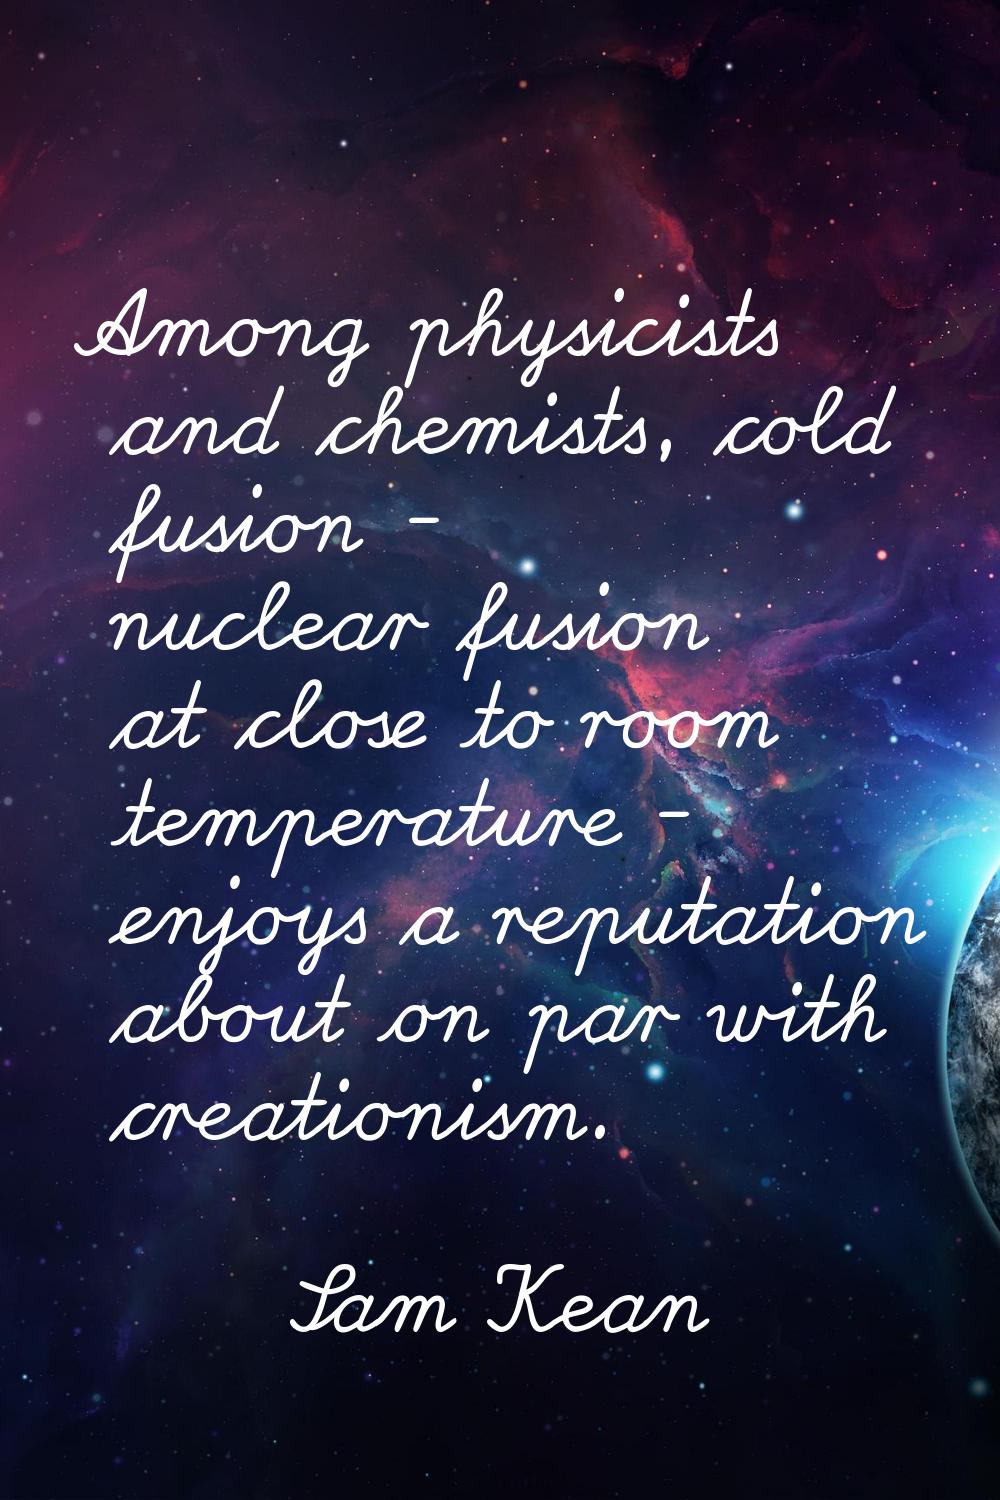 Among physicists and chemists, cold fusion - nuclear fusion at close to room temperature - enjoys a